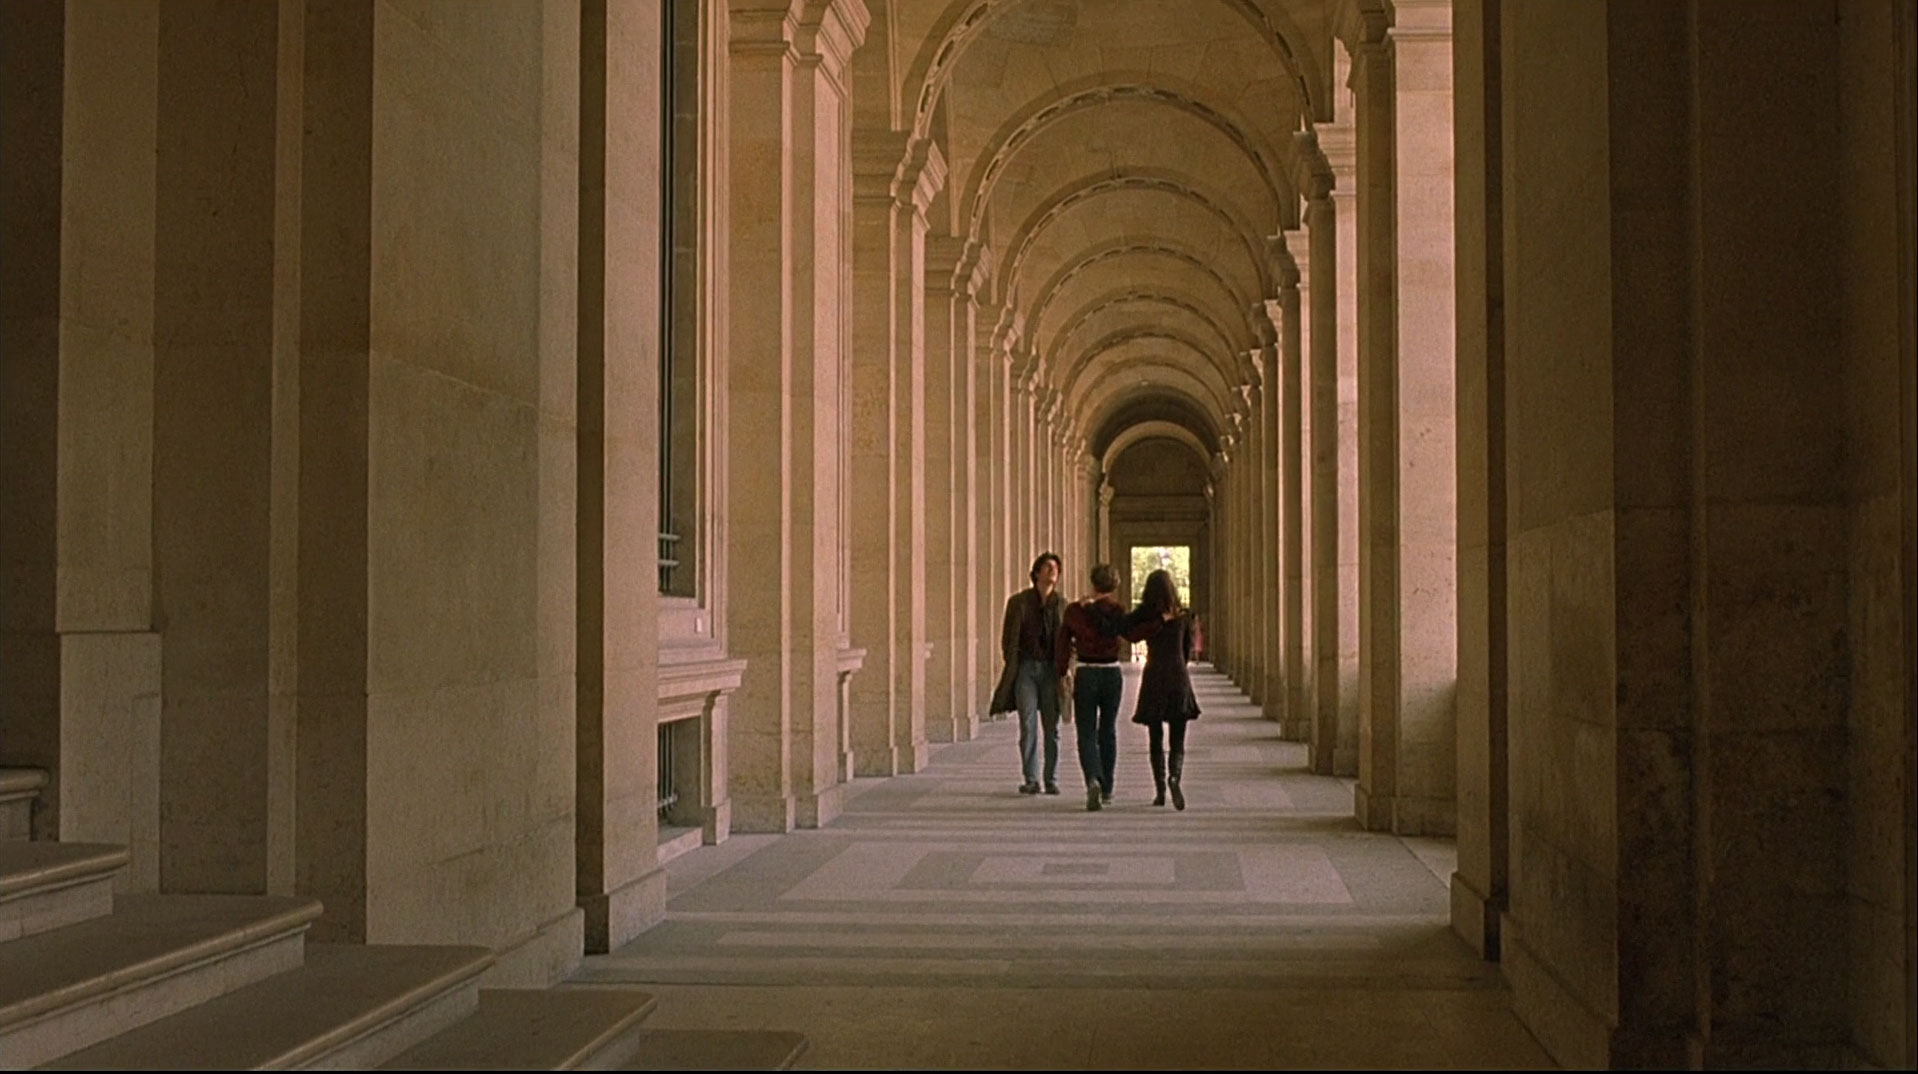 The Dreamers